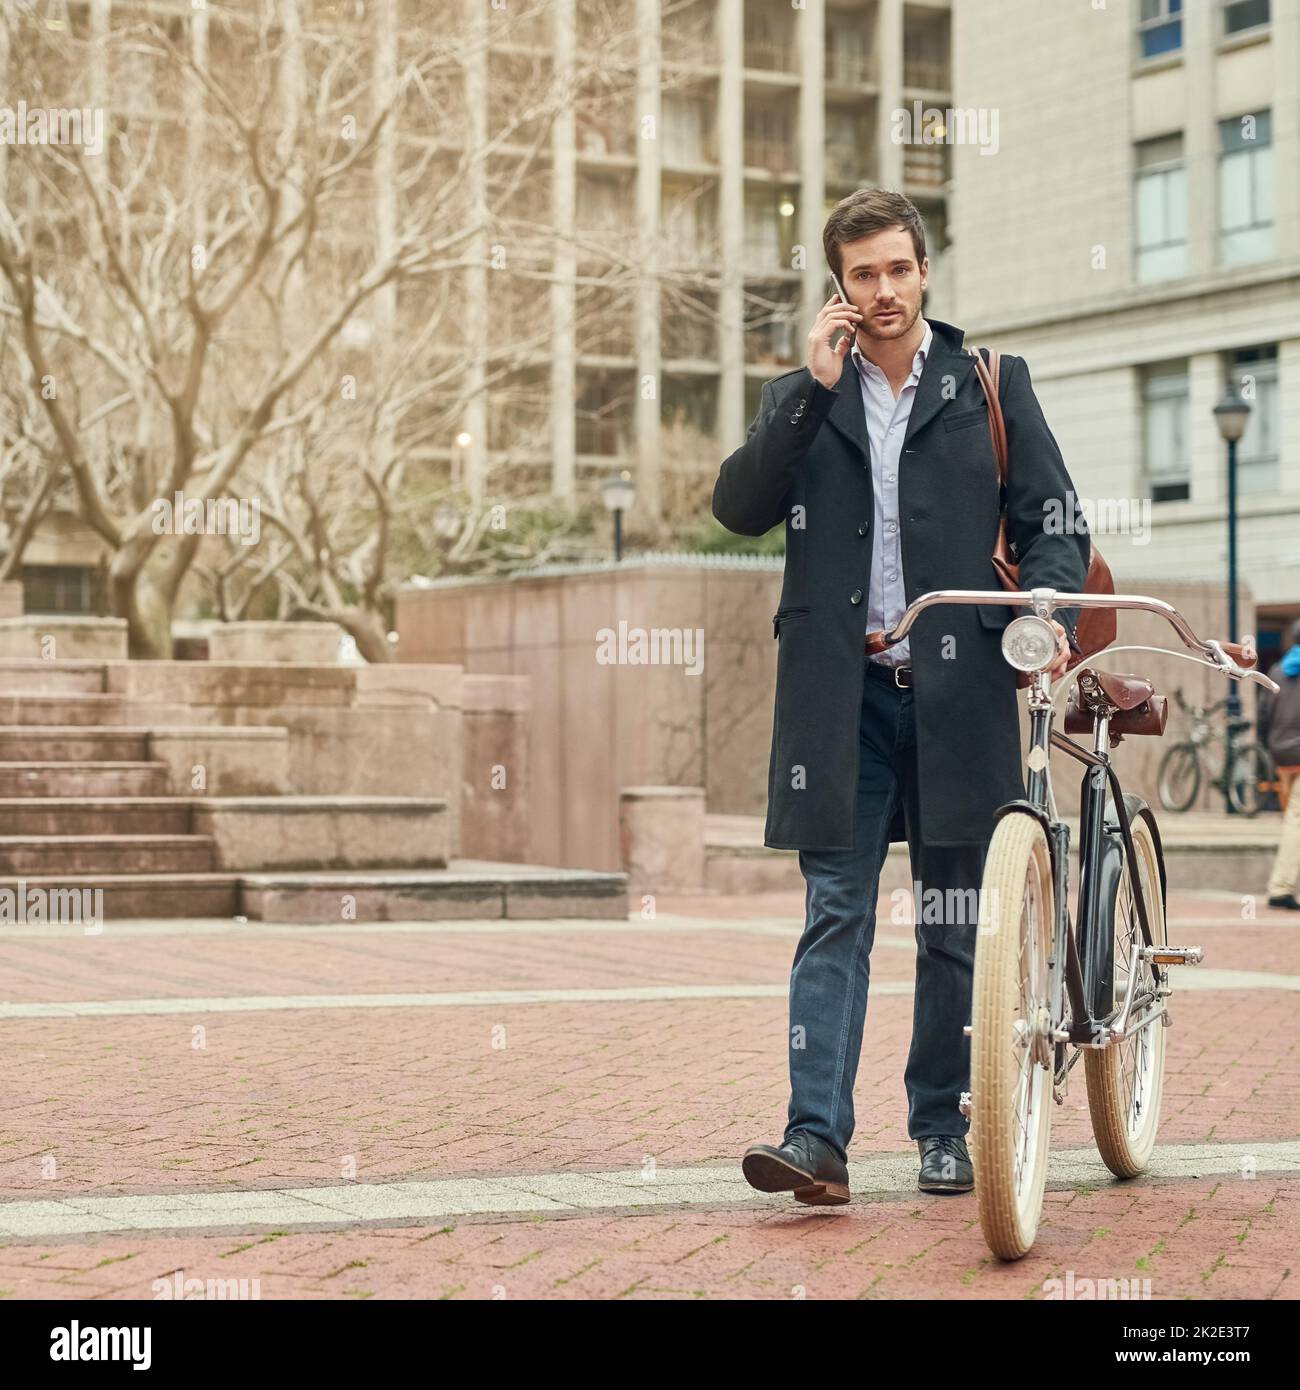 En route to work through the city. Portrait of a young businessman commuting to work with his bicycle. Stock Photo